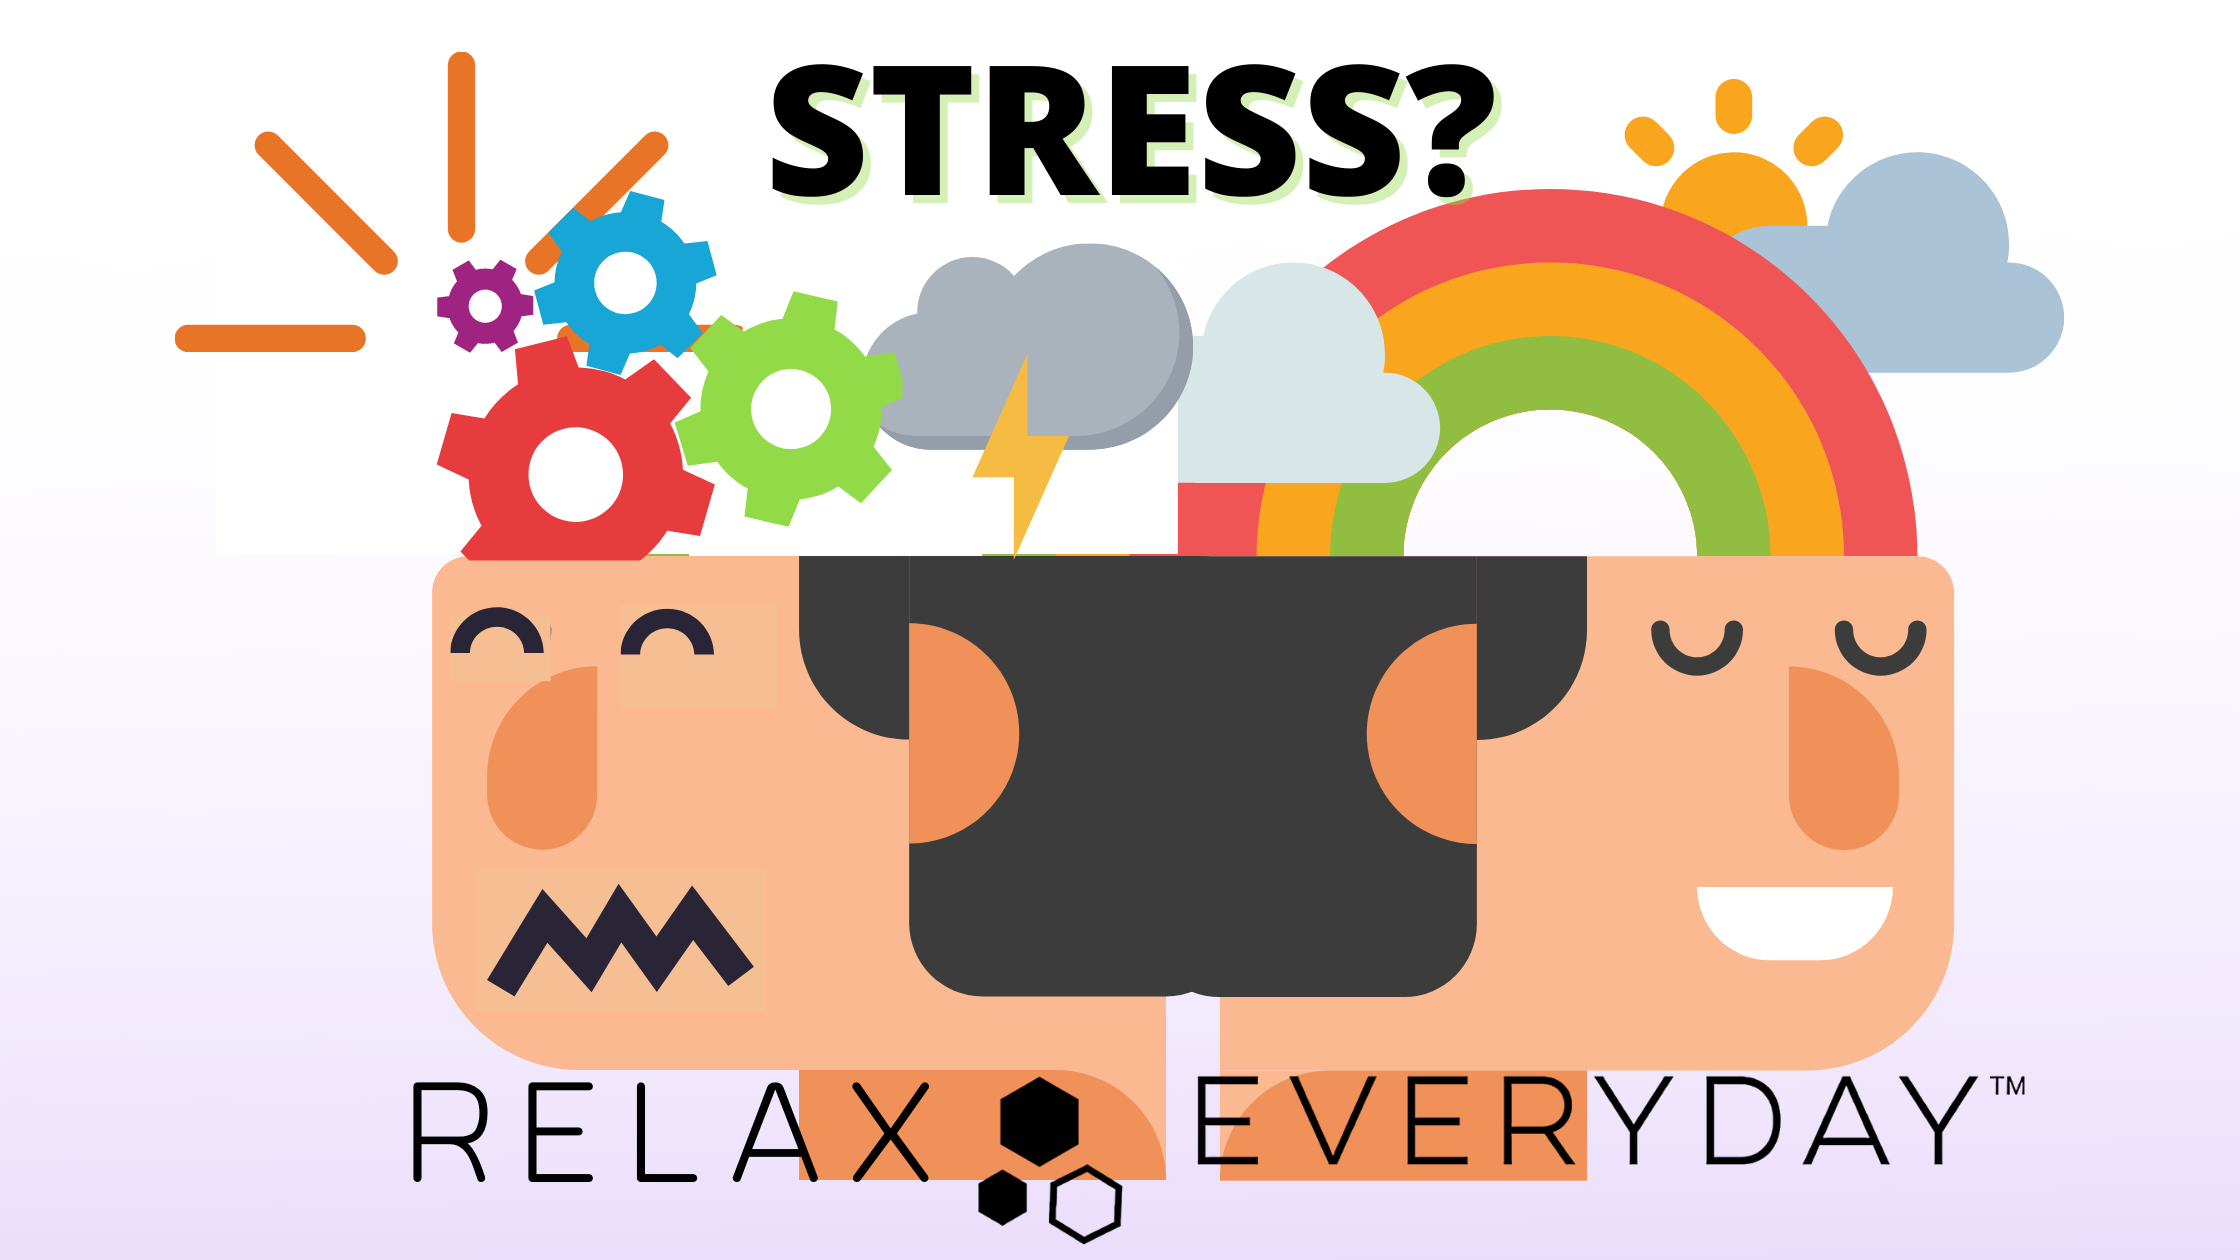 RELAXATION TIPS TO REDUCE STRESS Header